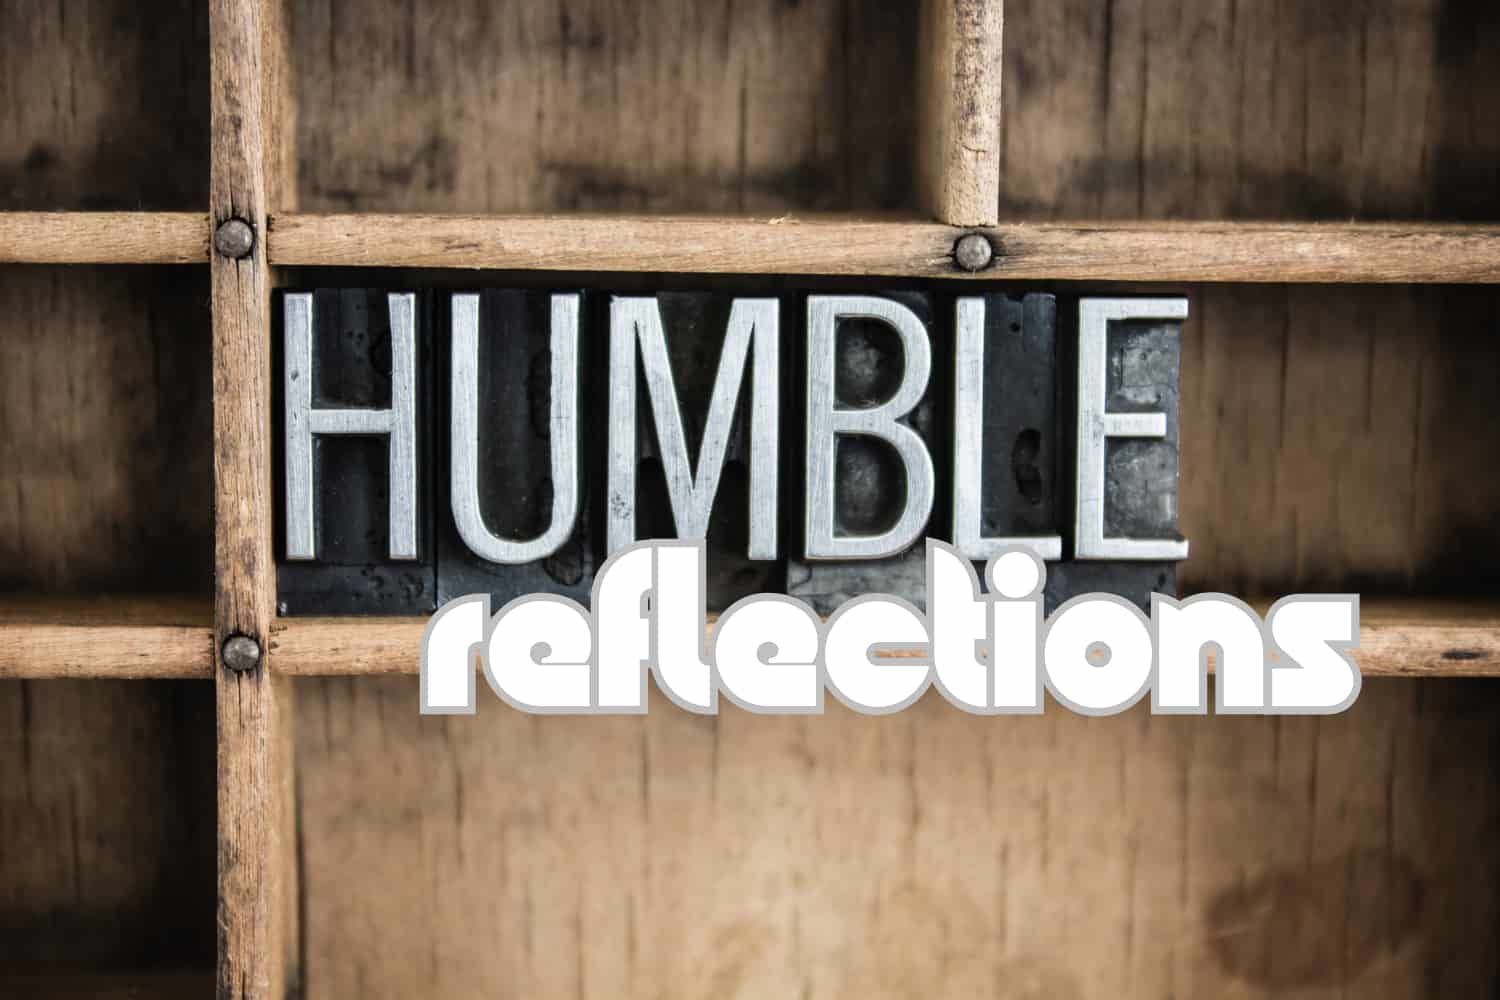 Object%20lesson%20-%20NT%20The%20pharisee%20and%20the%20tax%20collector%20-%20Humble%20reflections-5792de36 The Pharisee and the tax collector